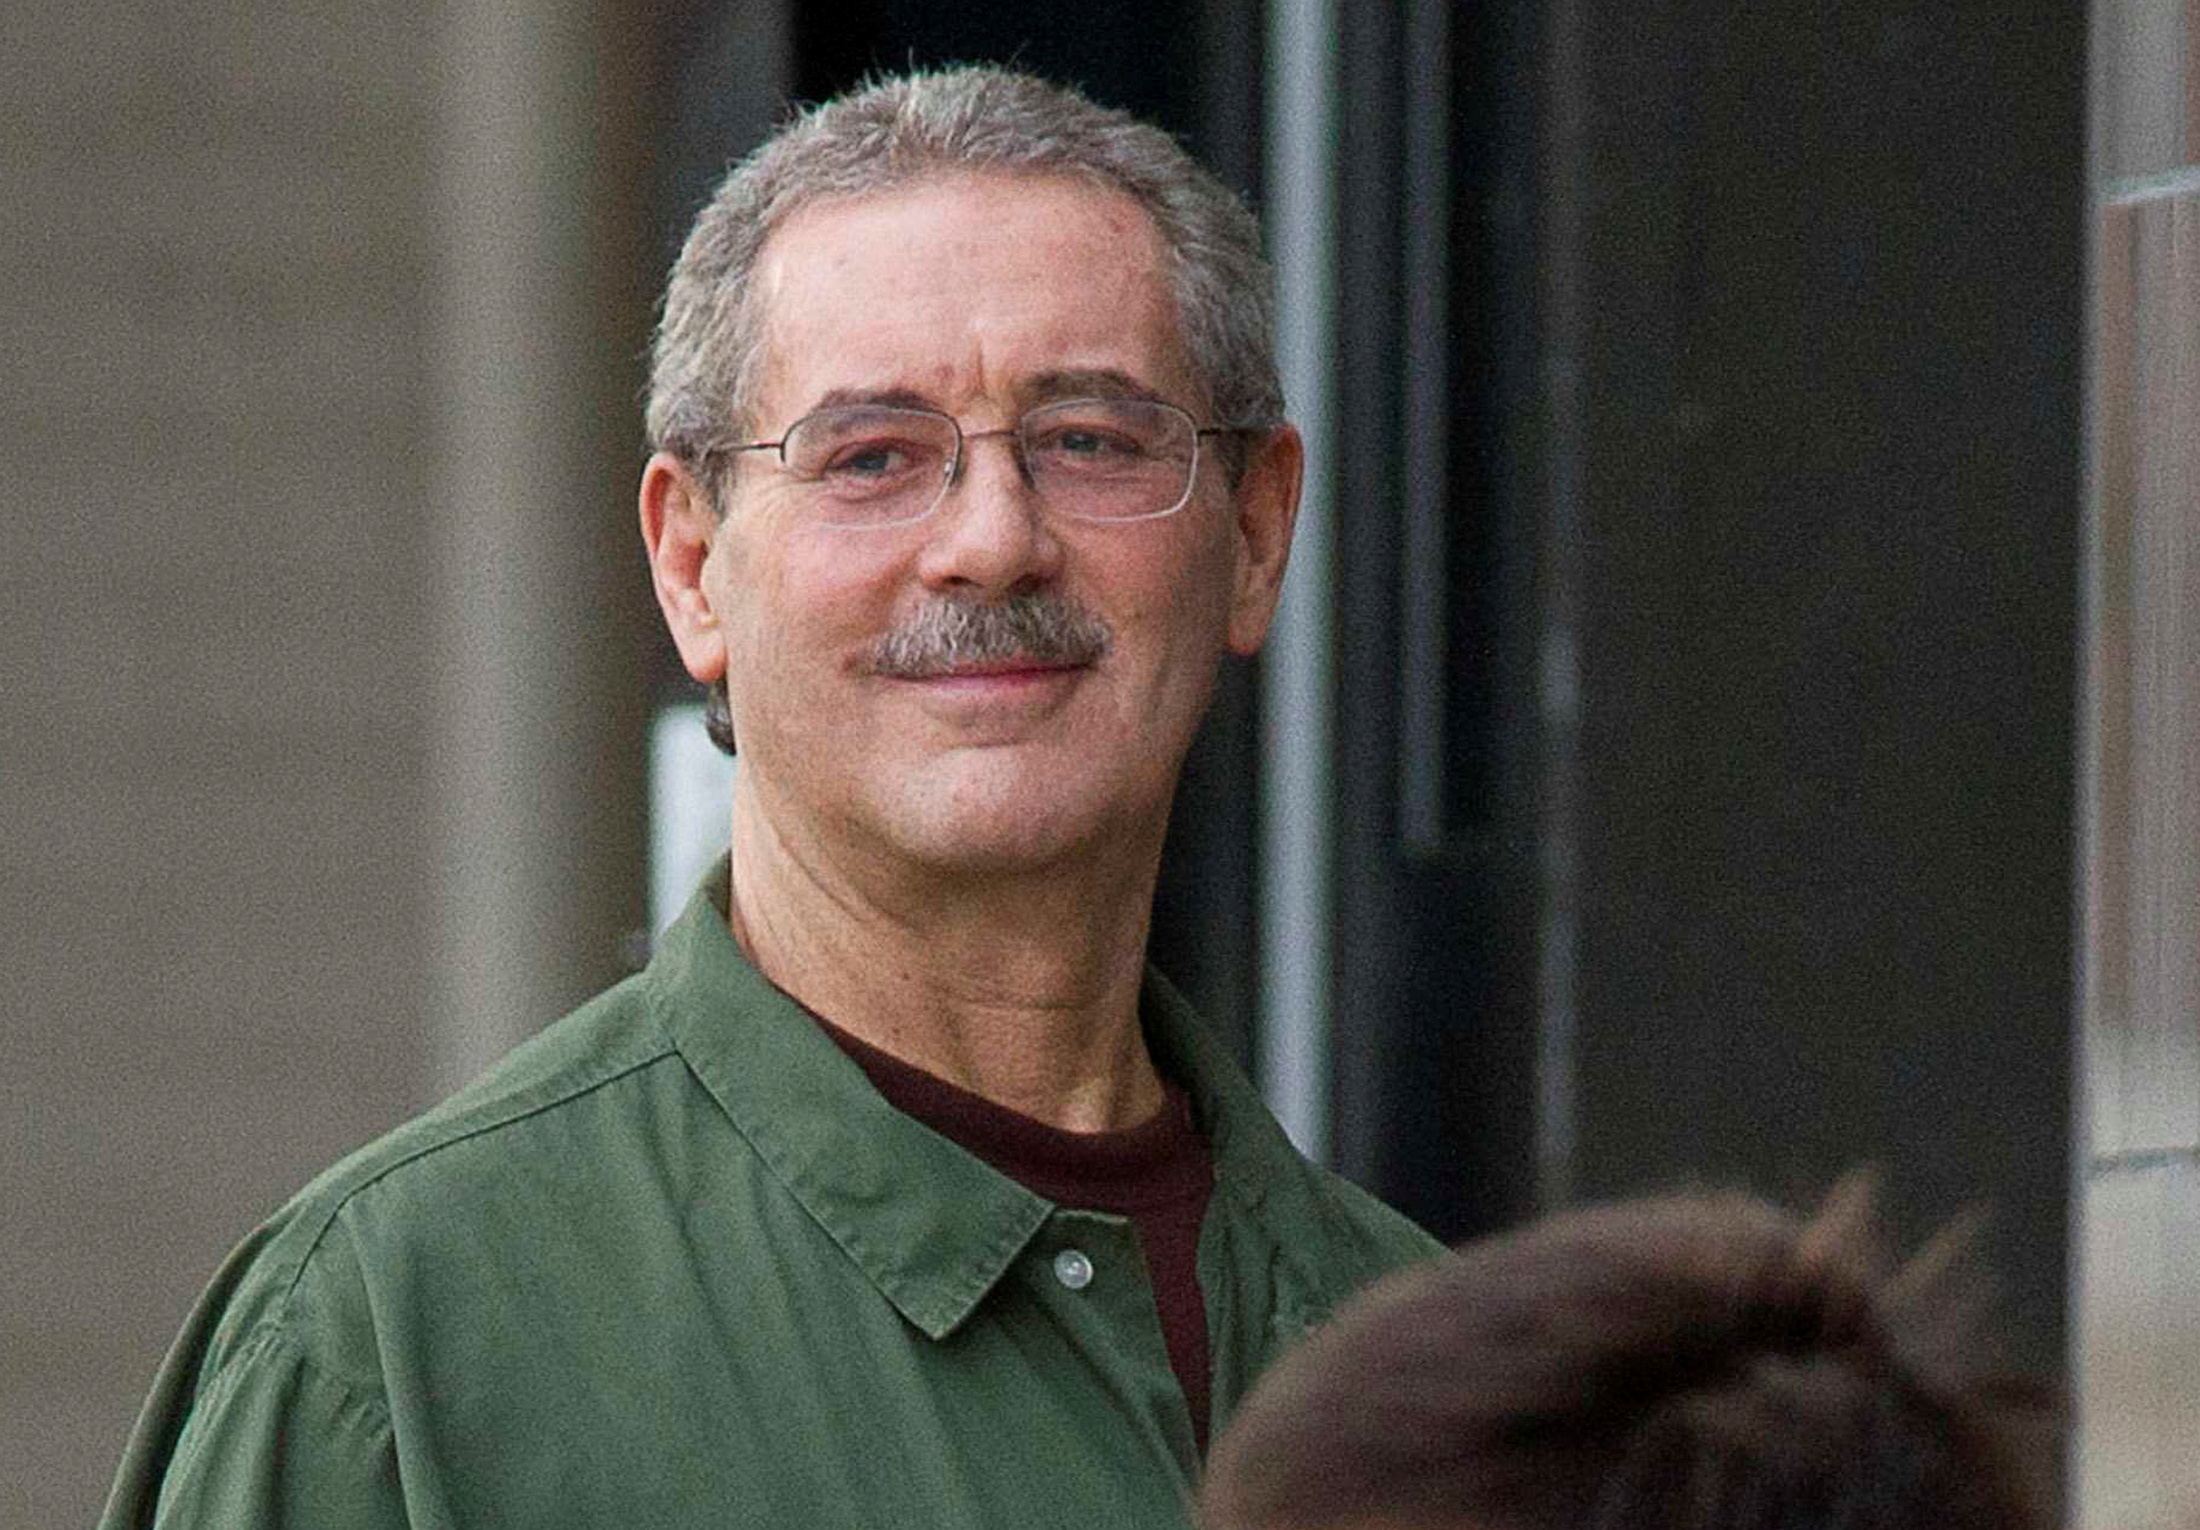 Allen Stanford smiles as he waits to enter the Federal Courthouse in Houston